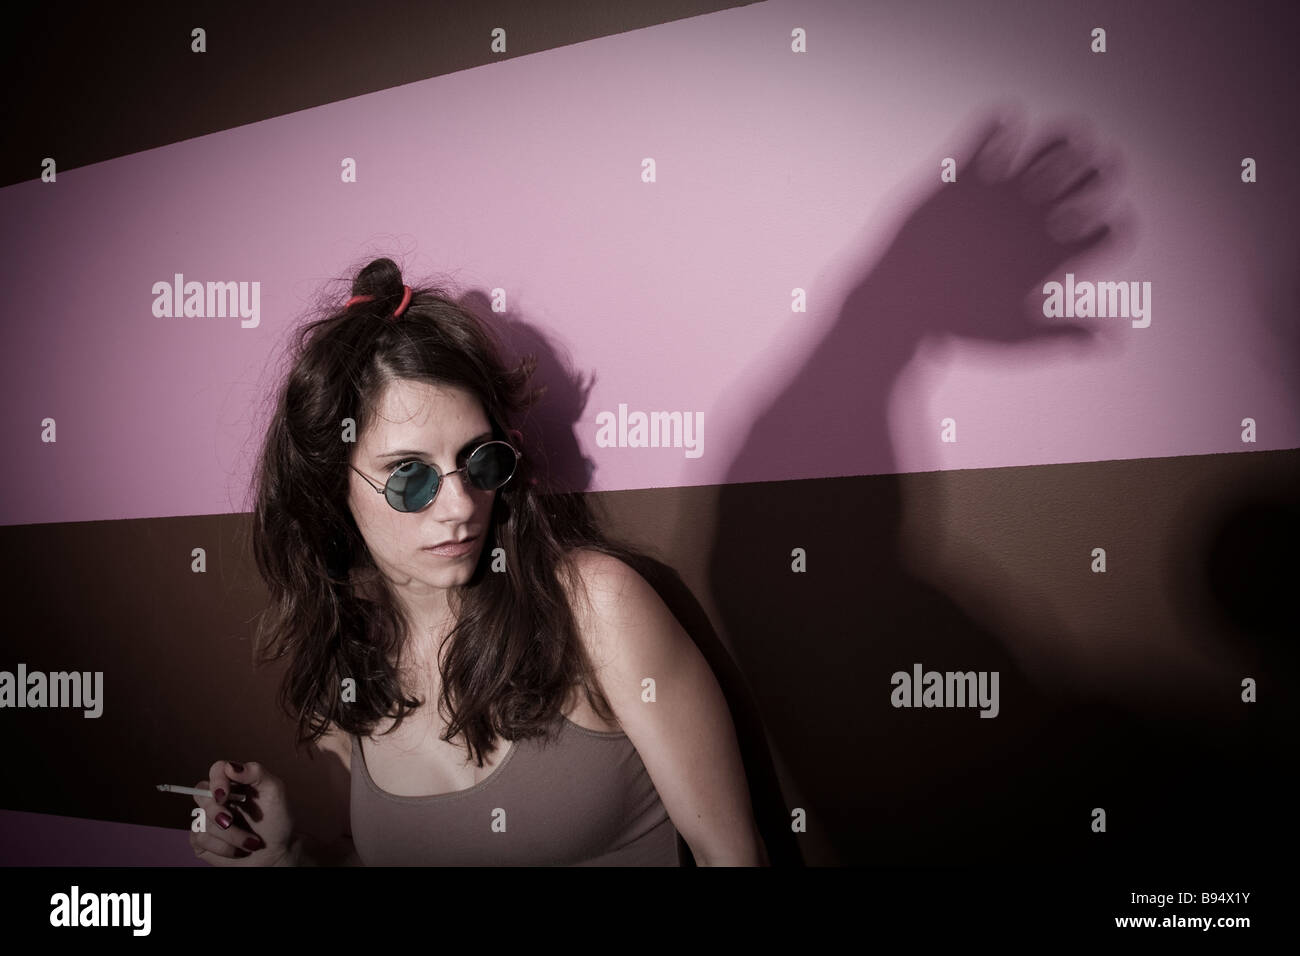 Young woman smoking a cigarette and wearing sunglasses in front of a shadow of a man s hand MODEL and LOCATION RELEASED Stock Photo